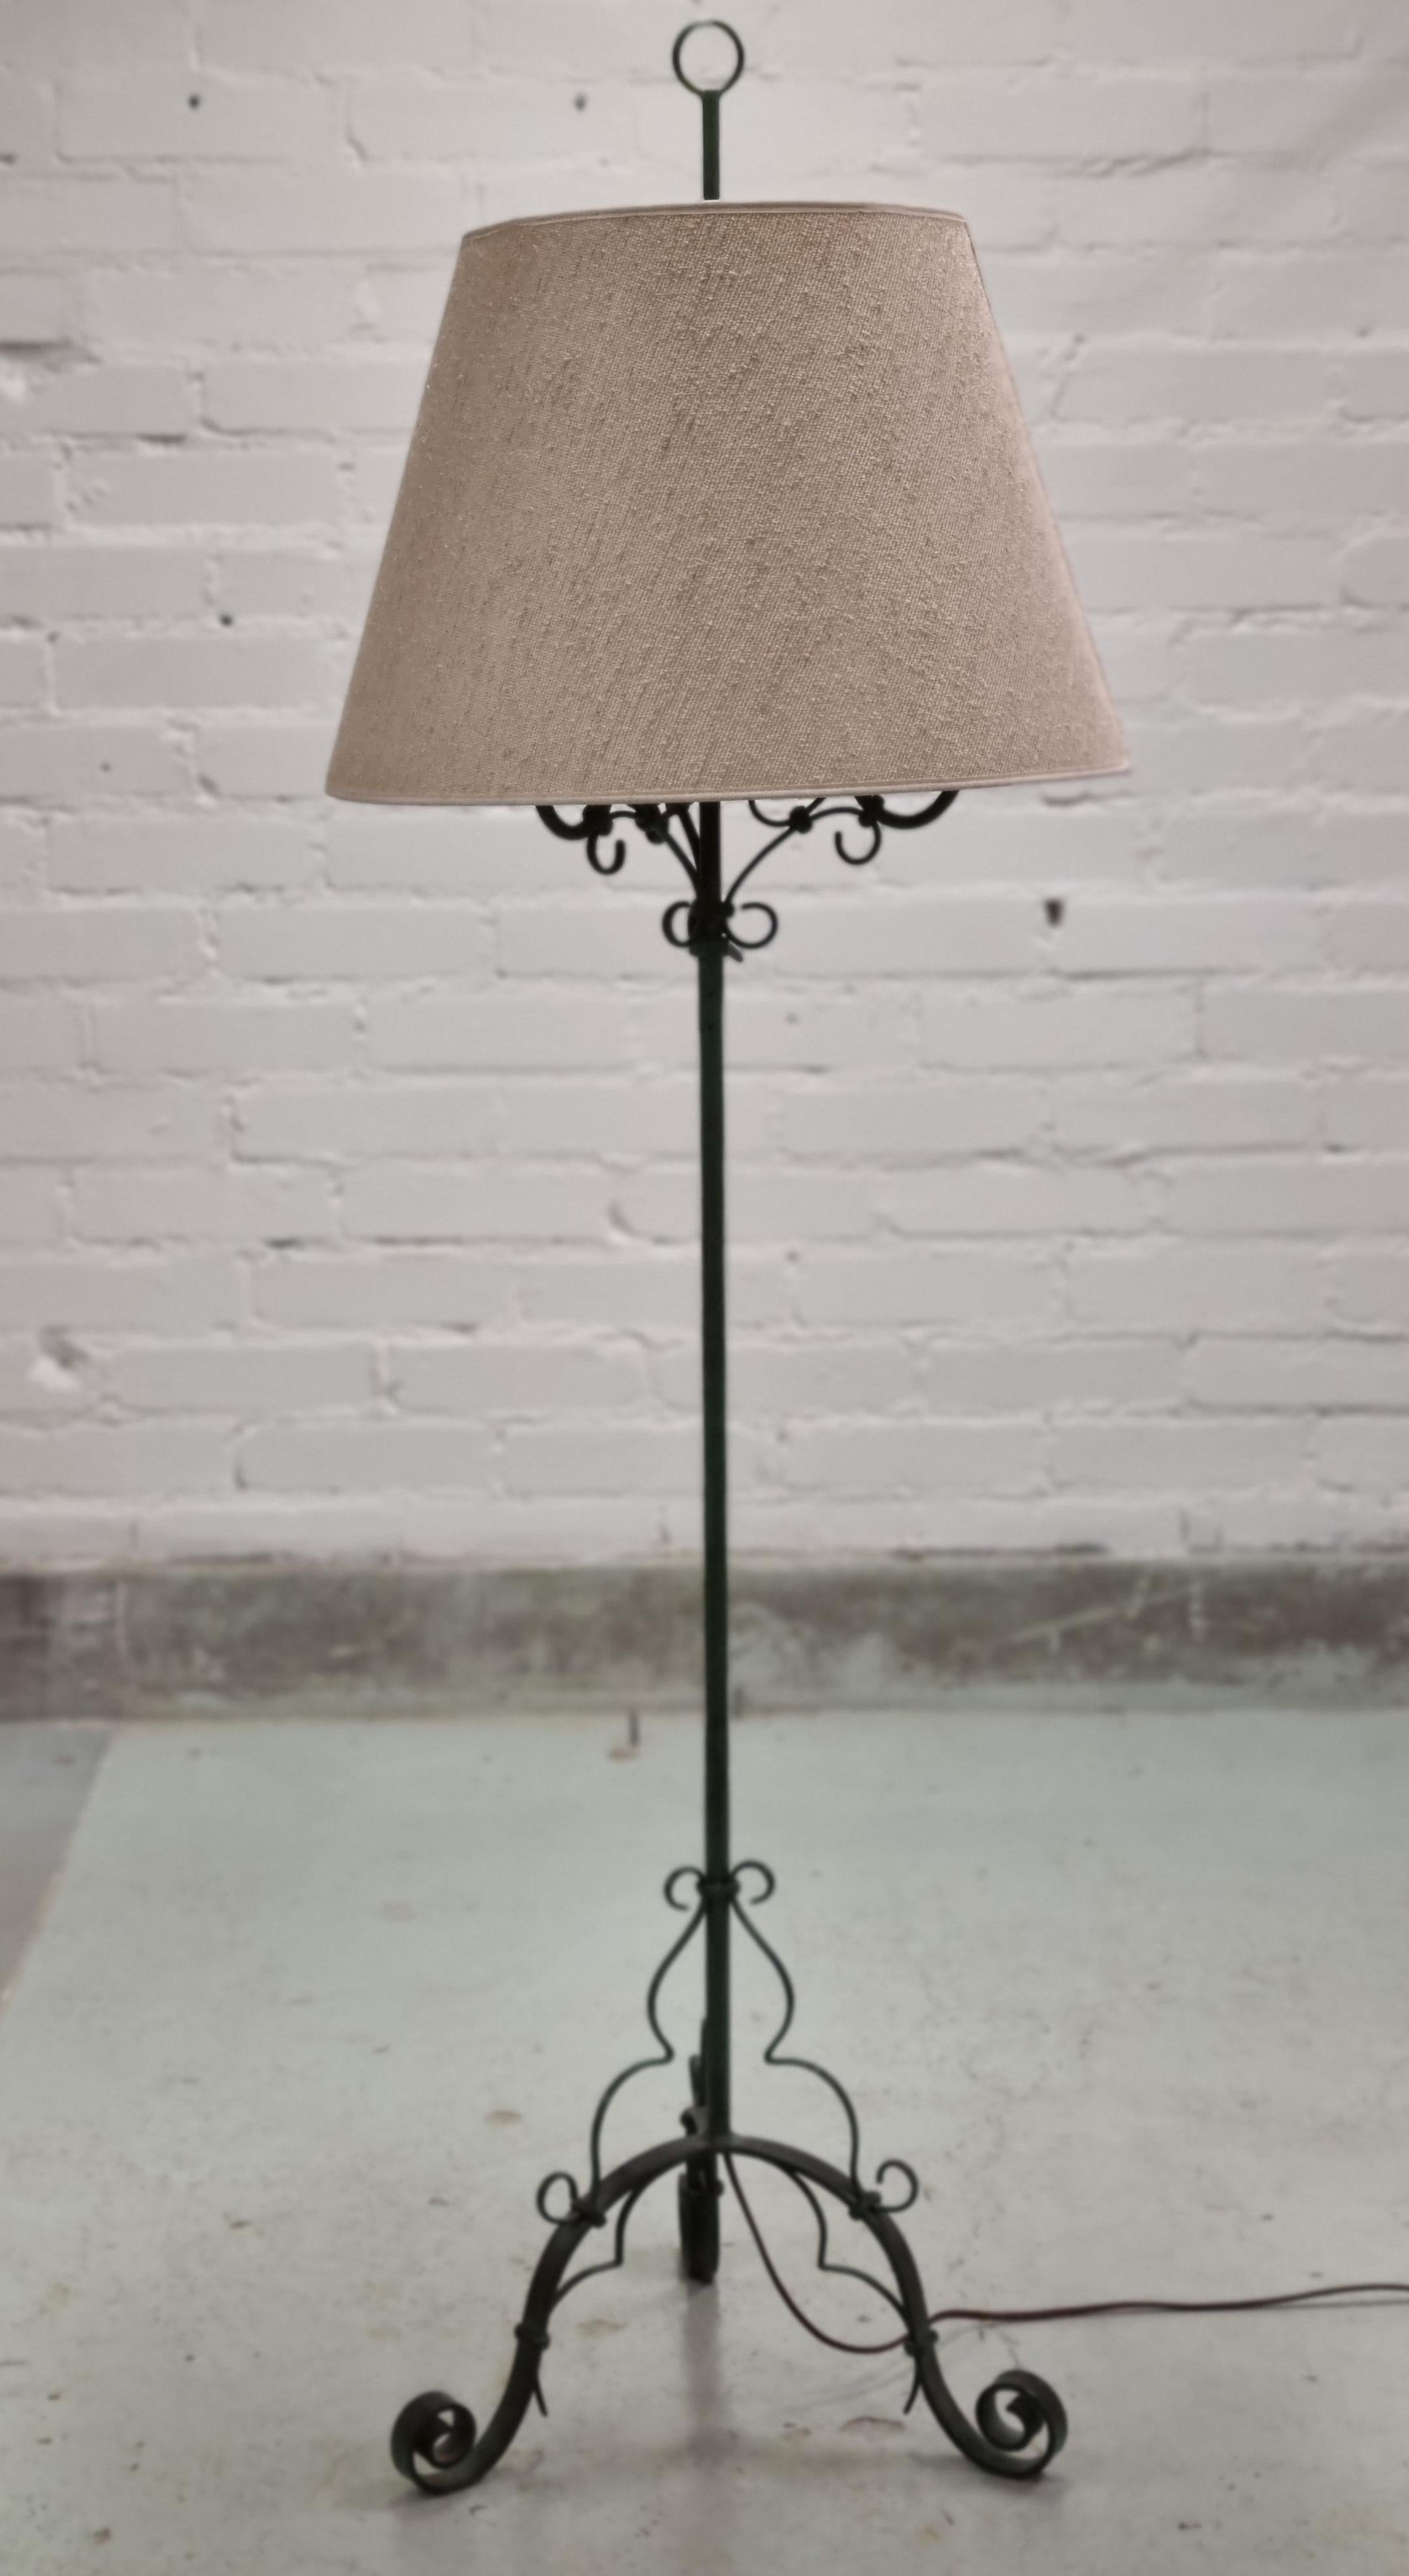 This iron beauty is designed by Finnish designer Antti Hakkarainen and manufactured by Taidetakomo Hakkarainen for Idman.
It has a decorated iron structure with leaf and flower motifs, three curved legs and three light sources with light switch on